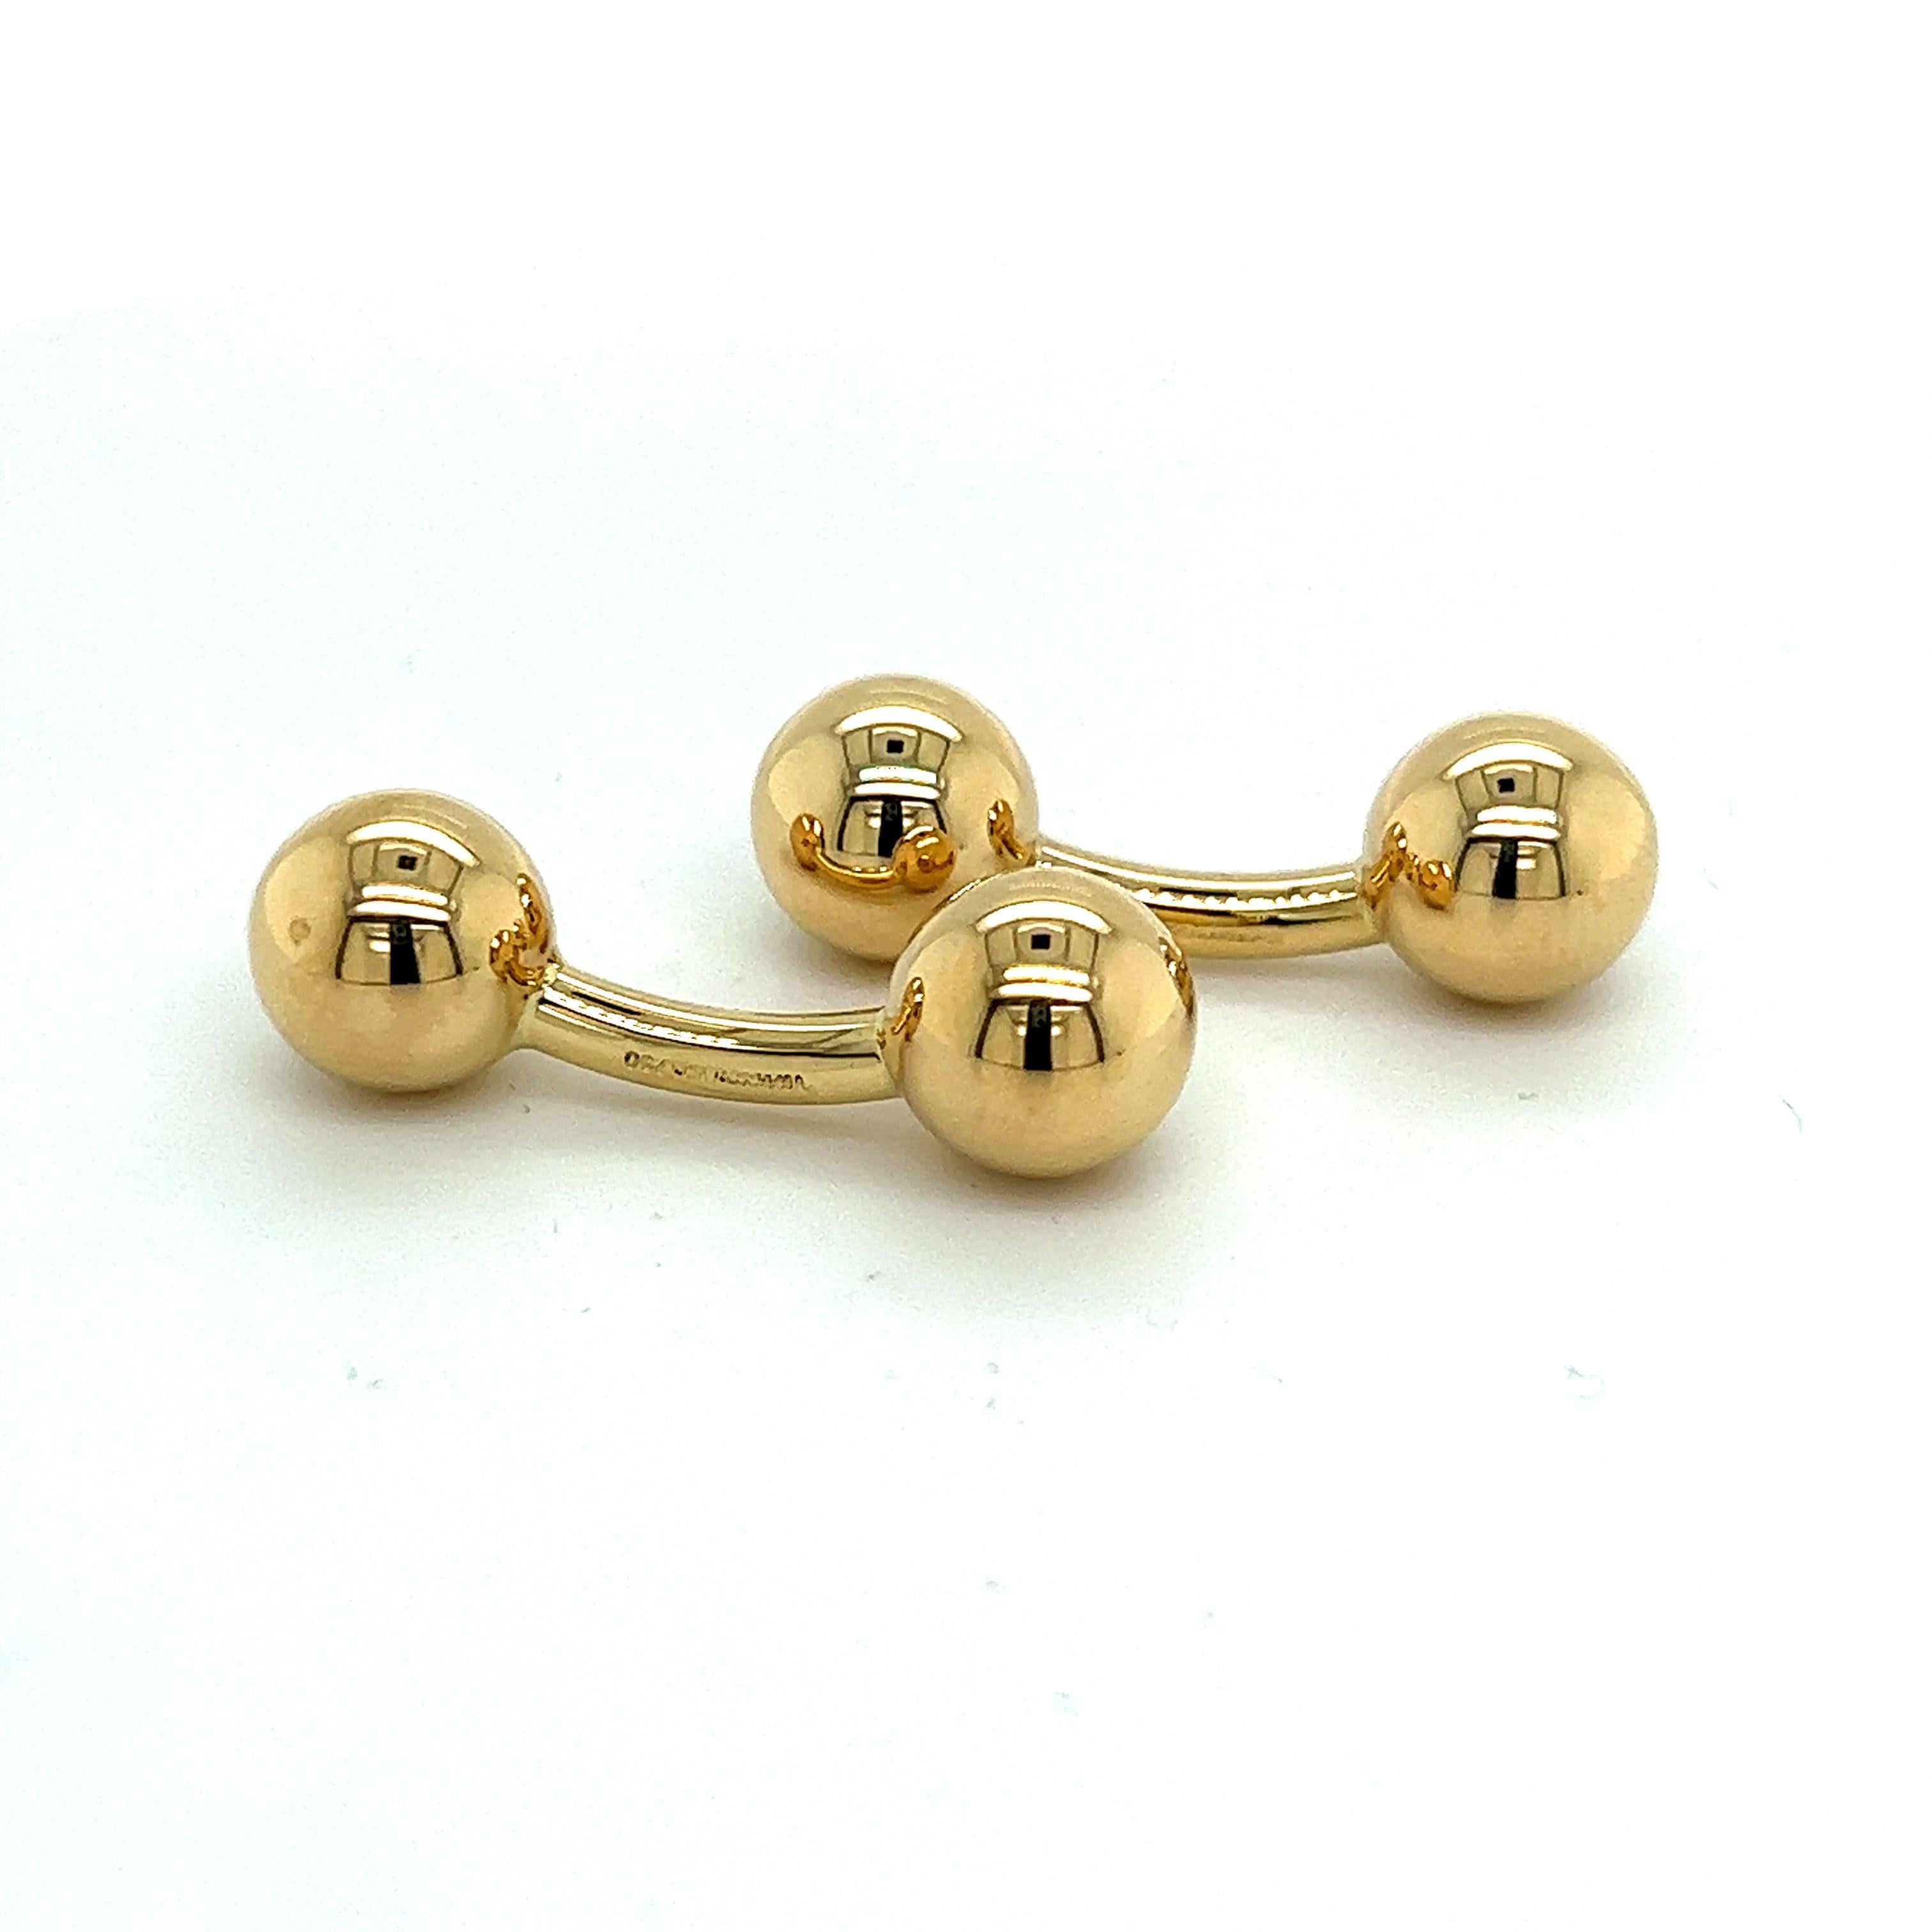 Tiffany & Co Estate Barbell Cufflinks 14k Y Gold TIF340

TRUSTED SELLER SINCE 2002

PLEASE SEE OUR HUNDREDS OF POSITIVE FEEDBACKS FROM OUR CLIENTS!!

FREE SHIPPING

DETAILS
Weight: 8.7 Grams
Metal: 14k Yellow Gold

These Authentic Tiffany & Co.